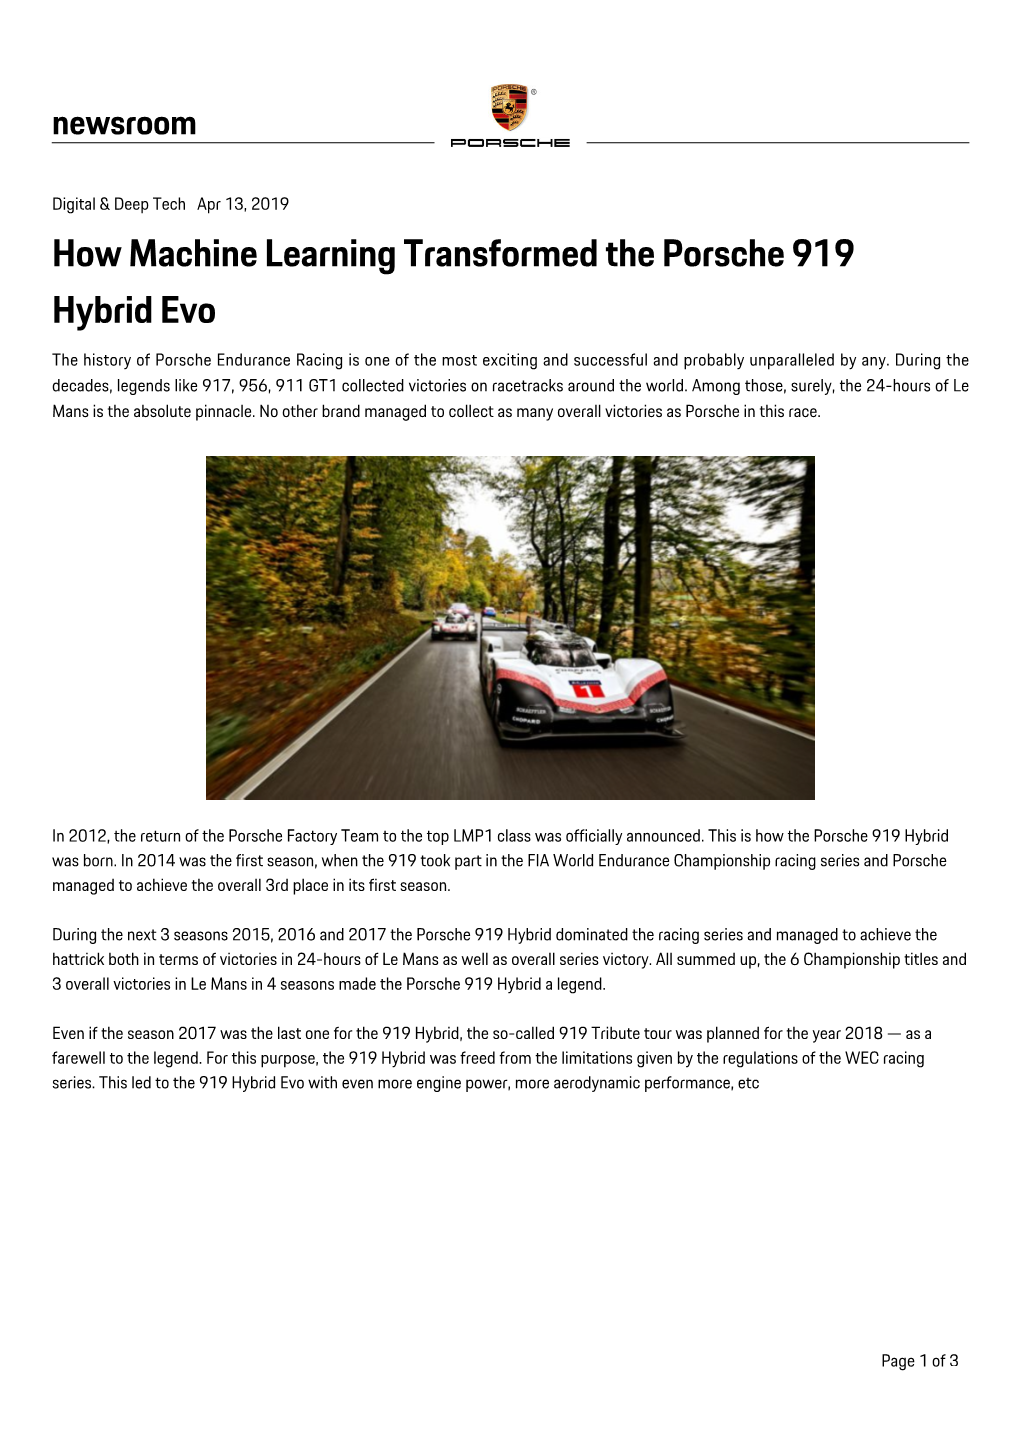 How Machine Learning Transformed the Porsche 919 Hybrid